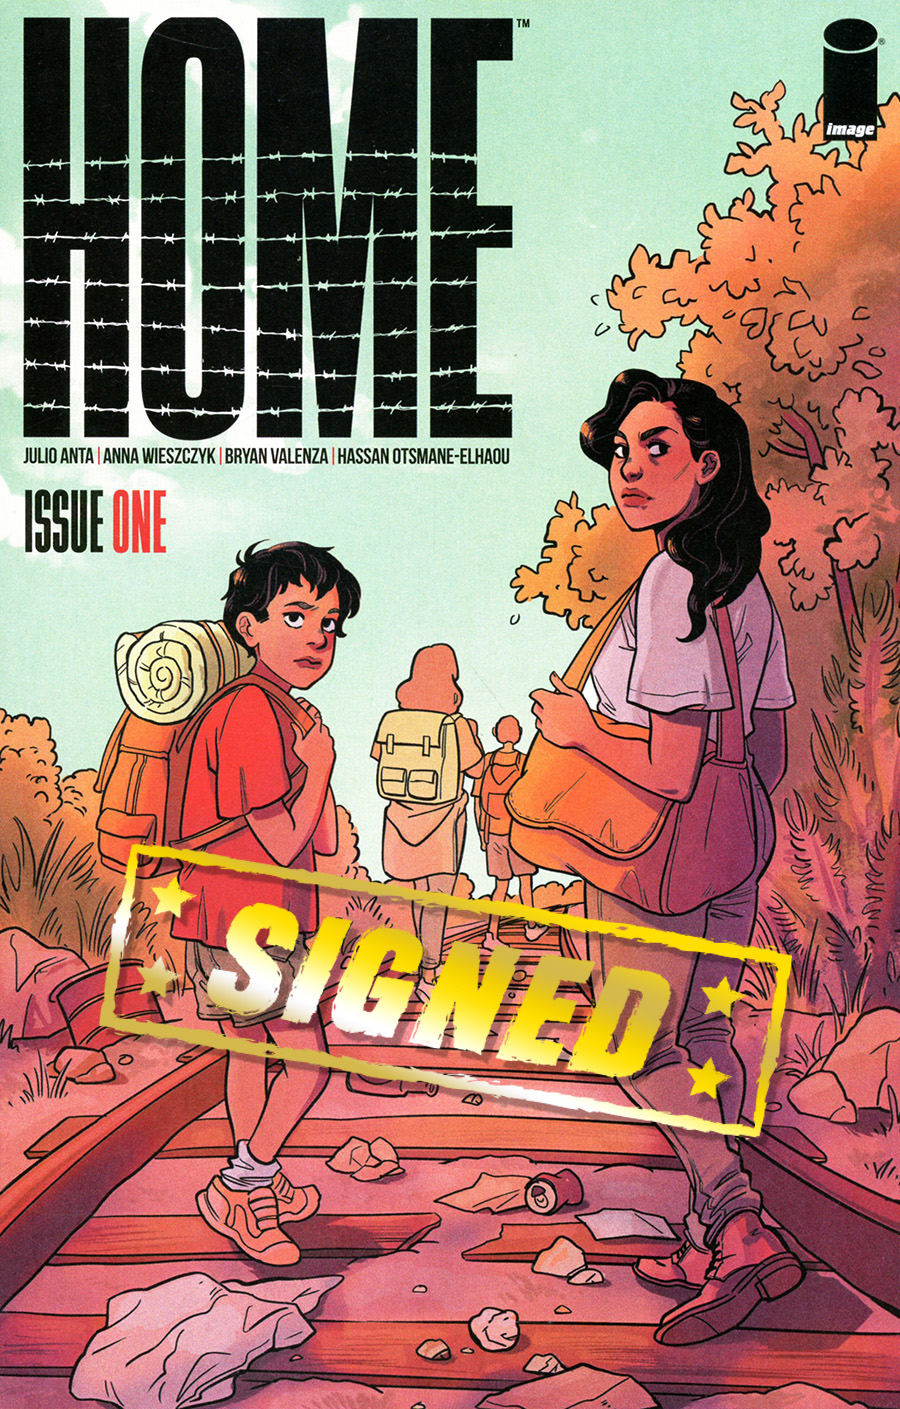 Home (Image Comics) #1 Cover C Regular Lisa Sterle Cover Signed By Julio Anta